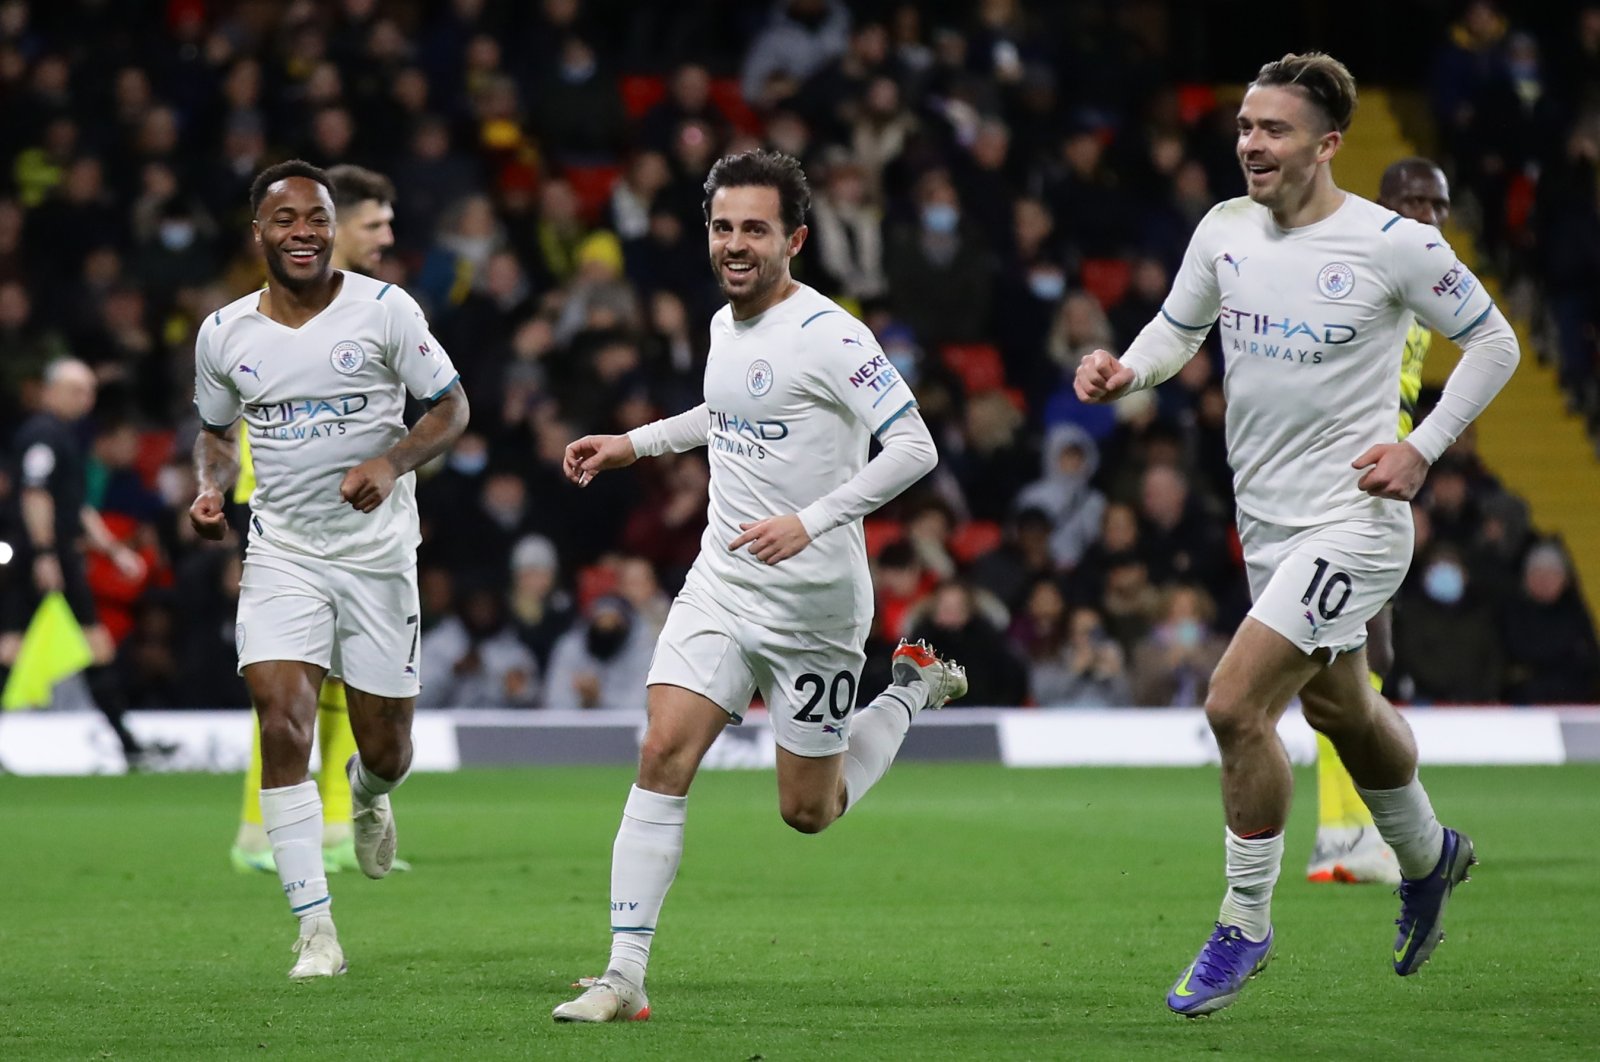 Manchester City&#039;s Bernardo Silva celebrates a goal with Jack Grealish and Raheem Sterling in a Premier League match against Watford, Vicarage Road, Watford, England, Dec. 4, 2021. (Reuters Photo)